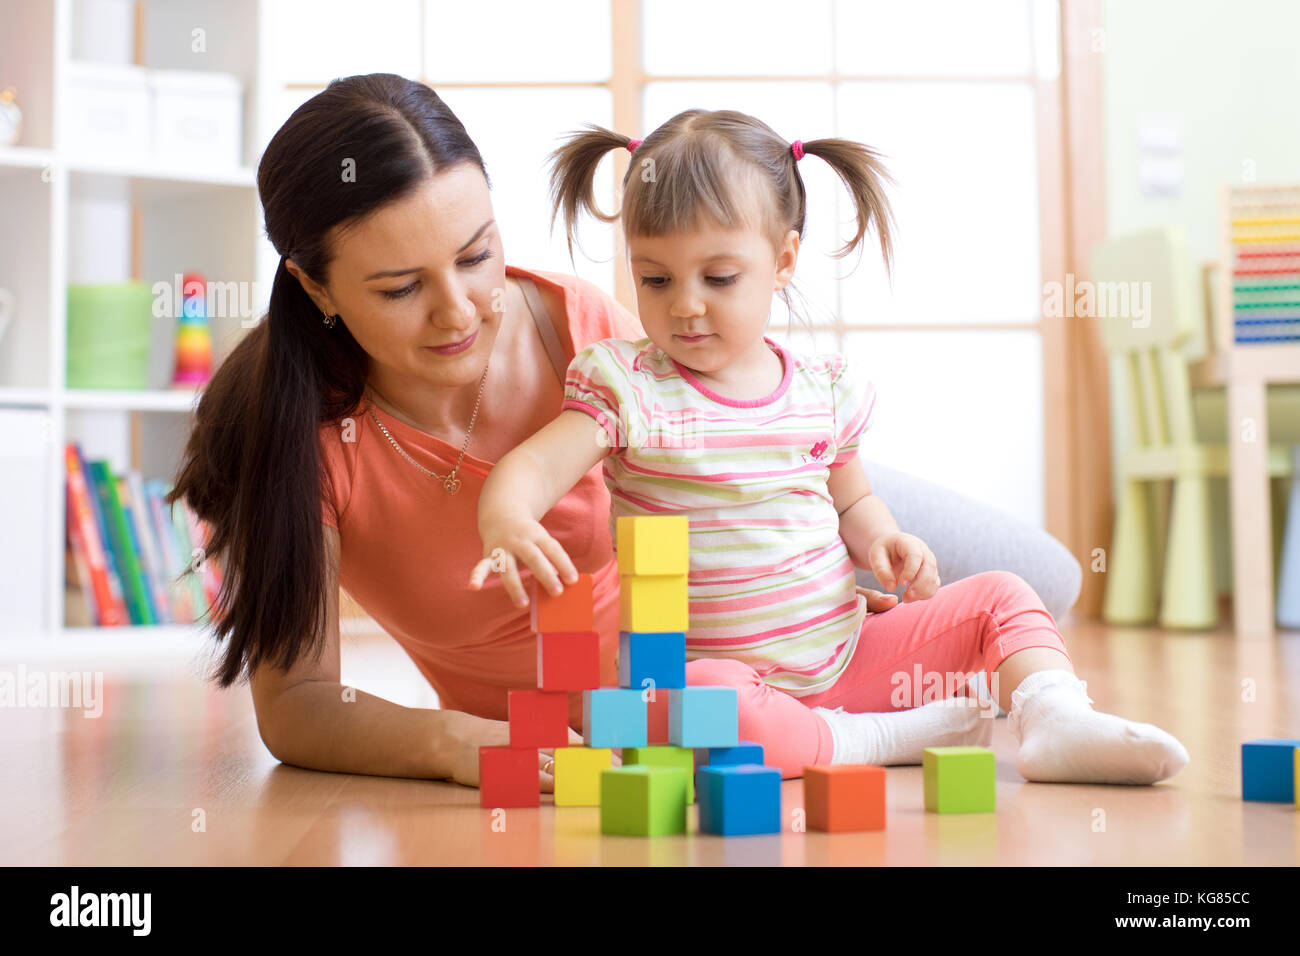 cute mother and child girl play together Stock Photo